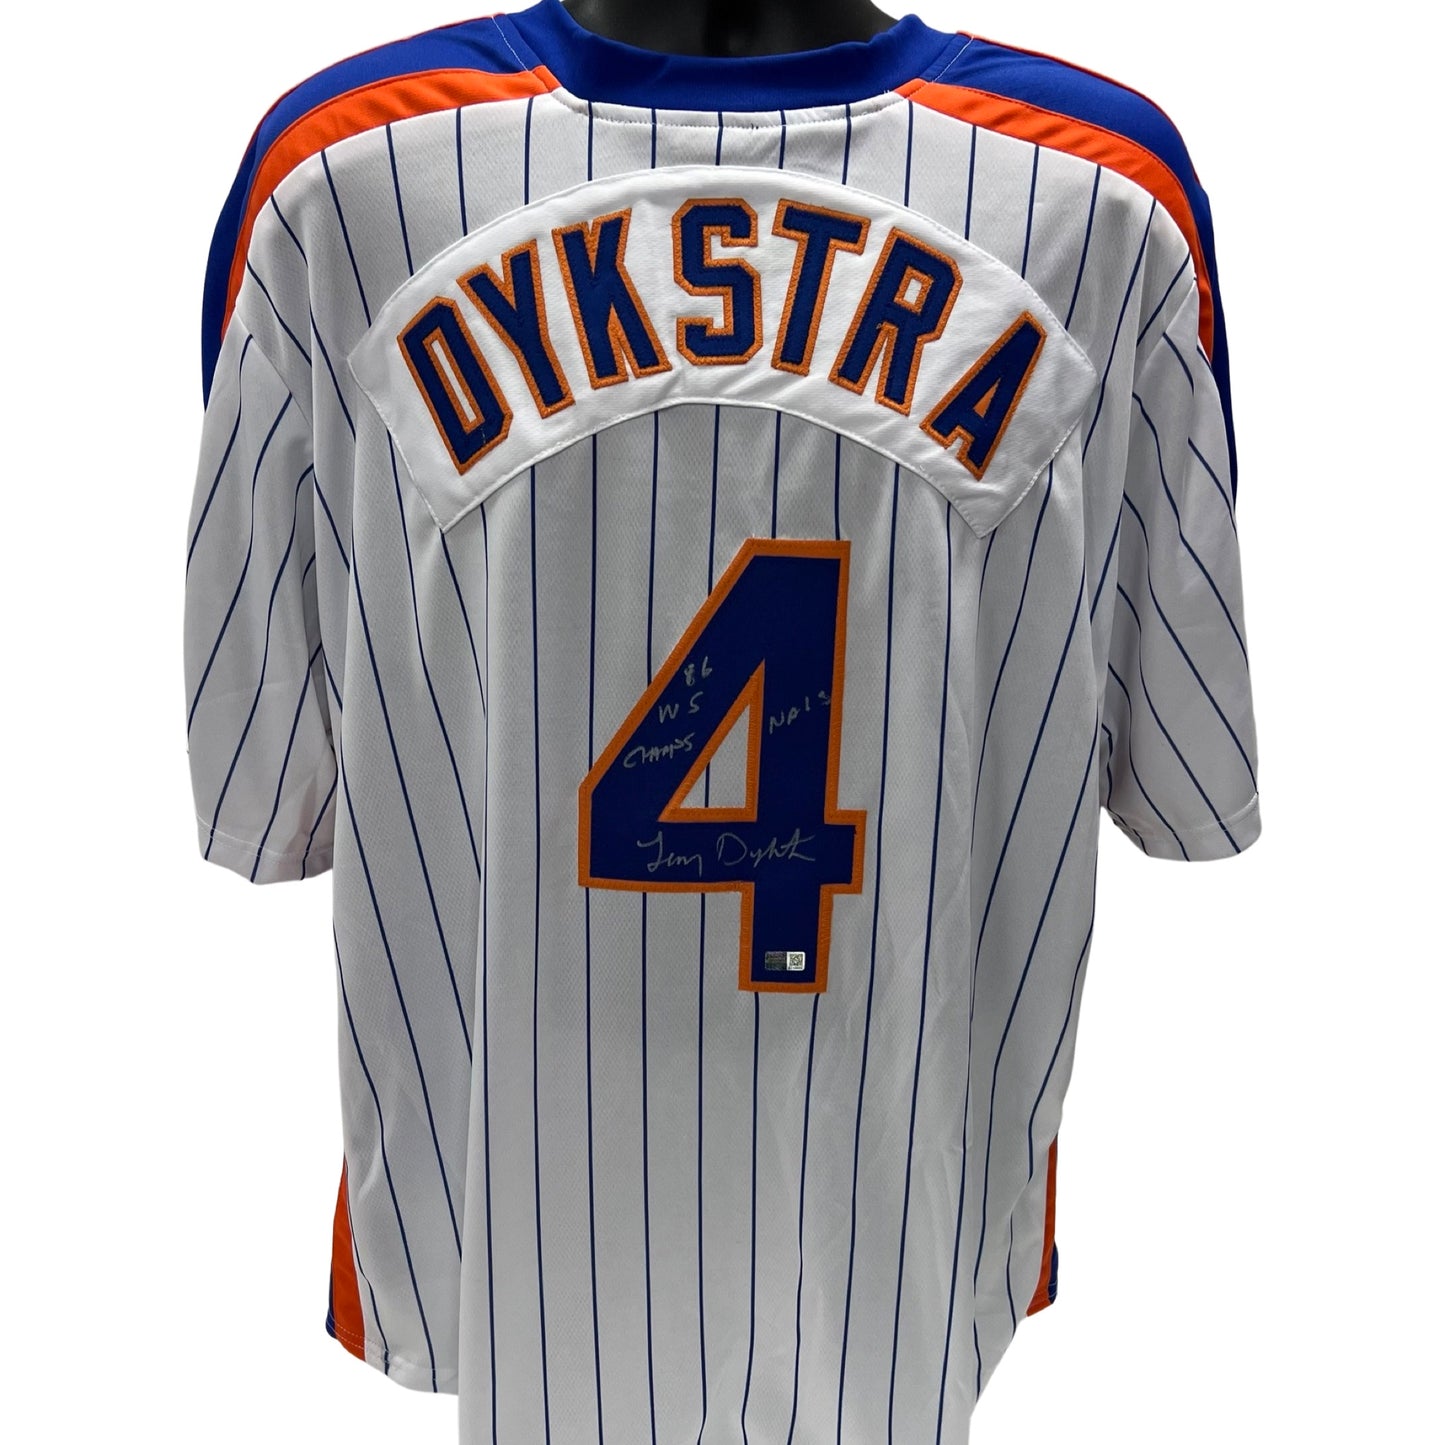 Lenny Dykstra Autographed New York Mets Pinstripe Jersey “1986 WS Champs, Nails” Inscriptions Steiner CX